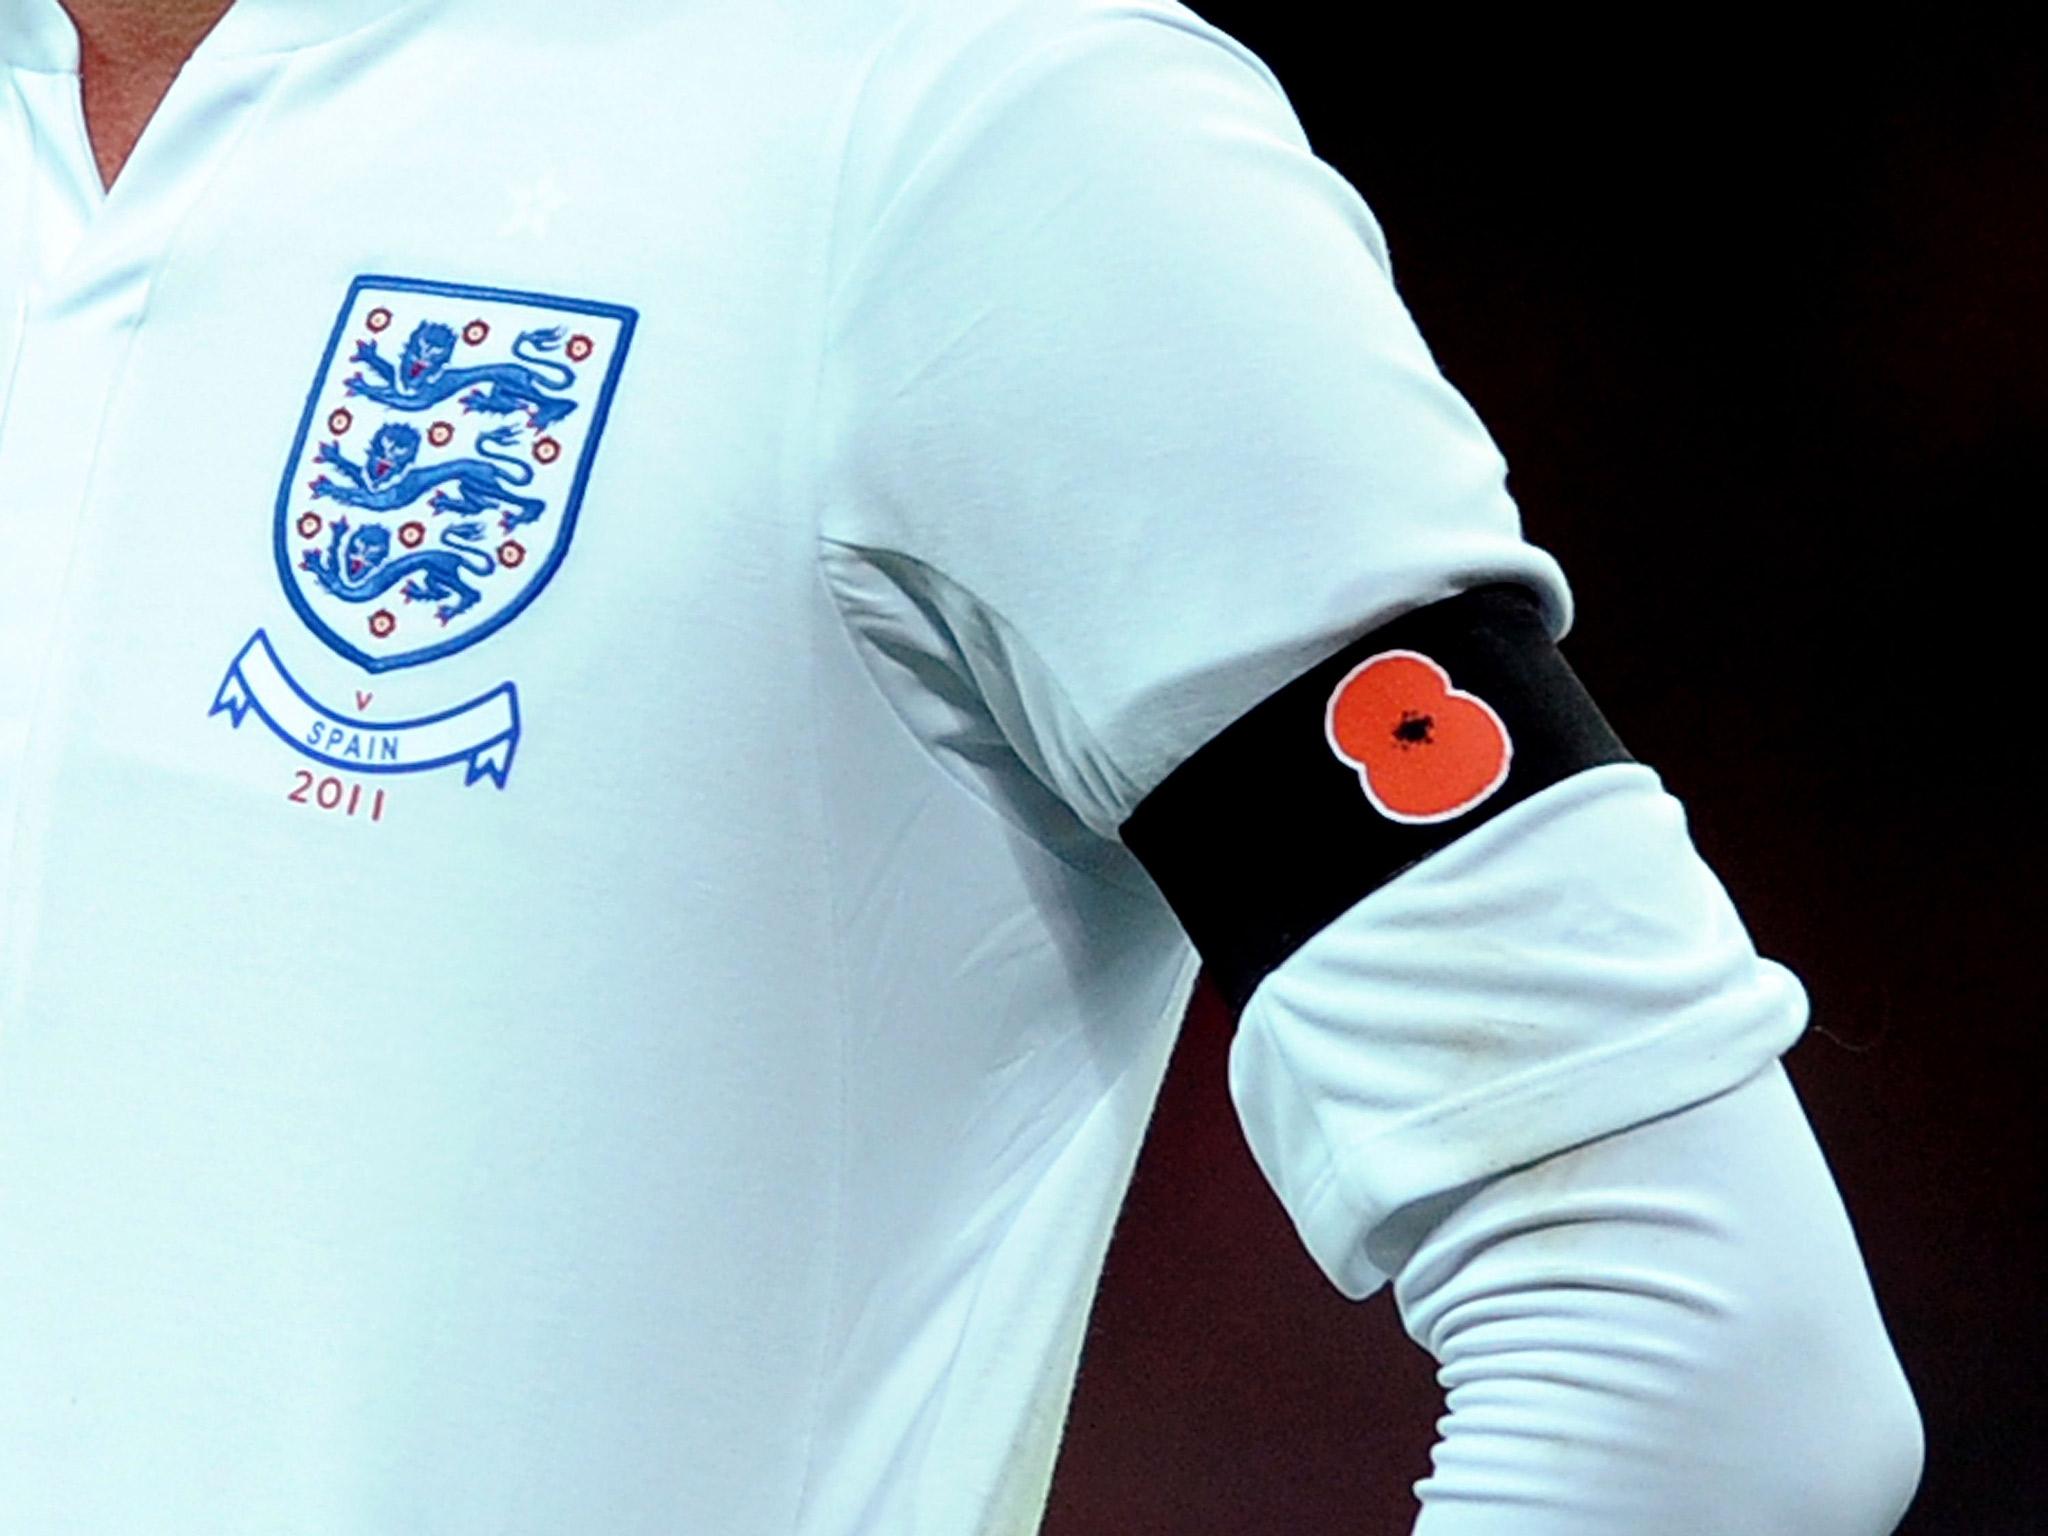 When the issue last arose in 2011, England wore black armbands bearing a poppy